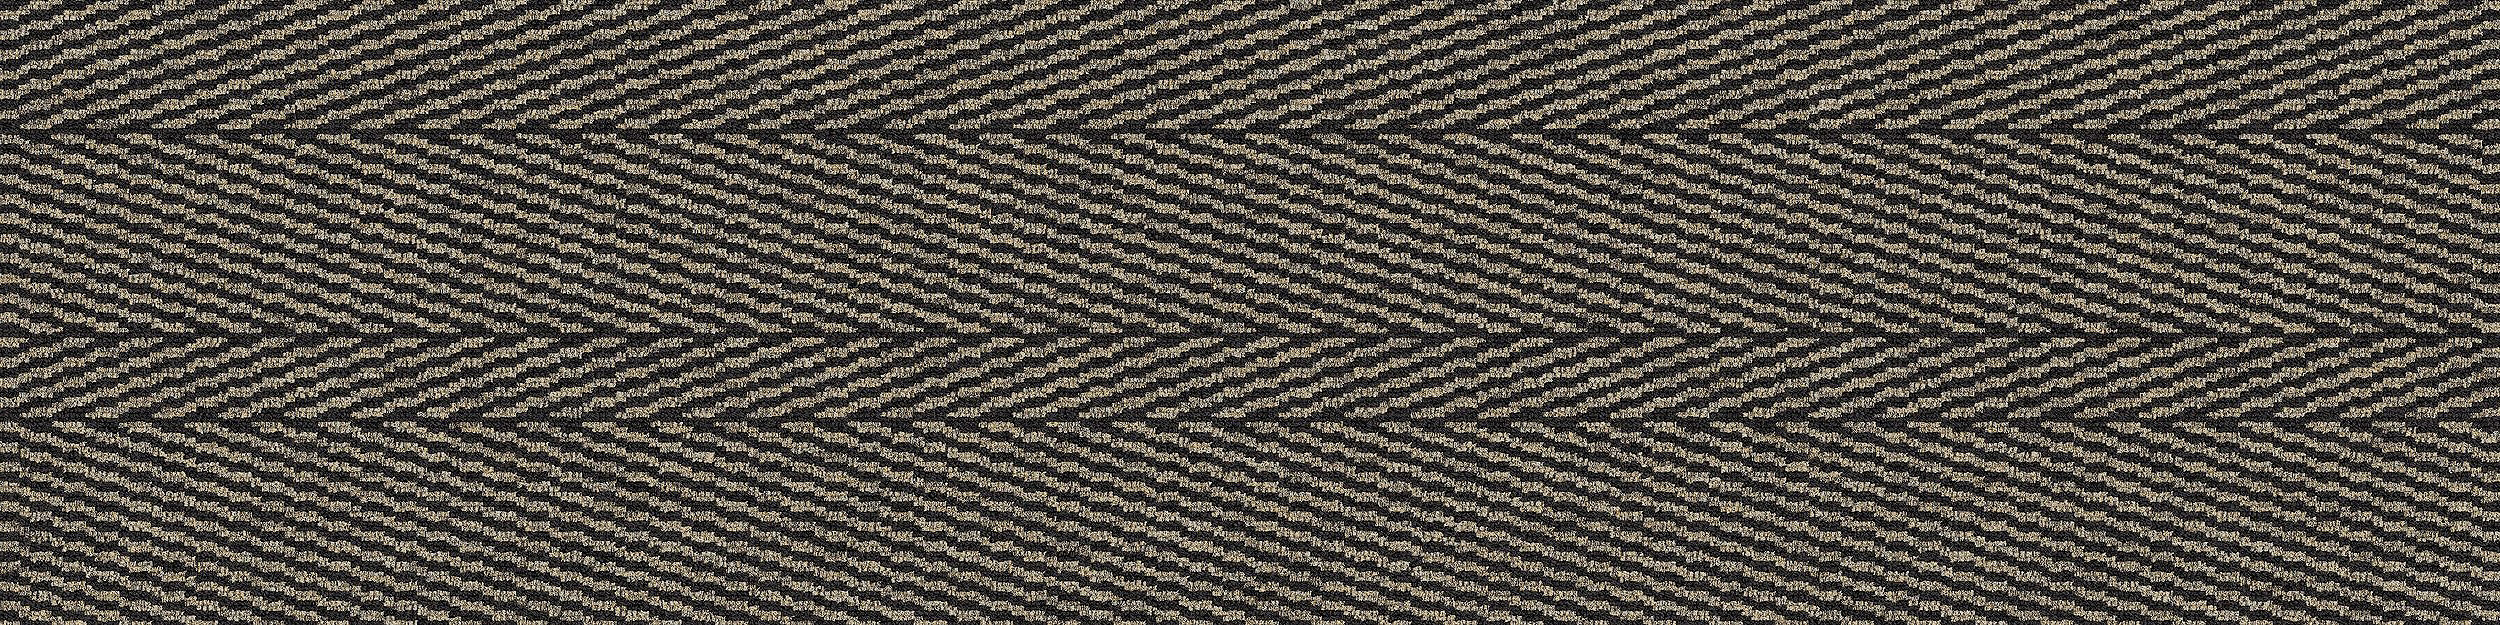 Stitch In Time Carpet Tile In Charcoal Stitch image number 6